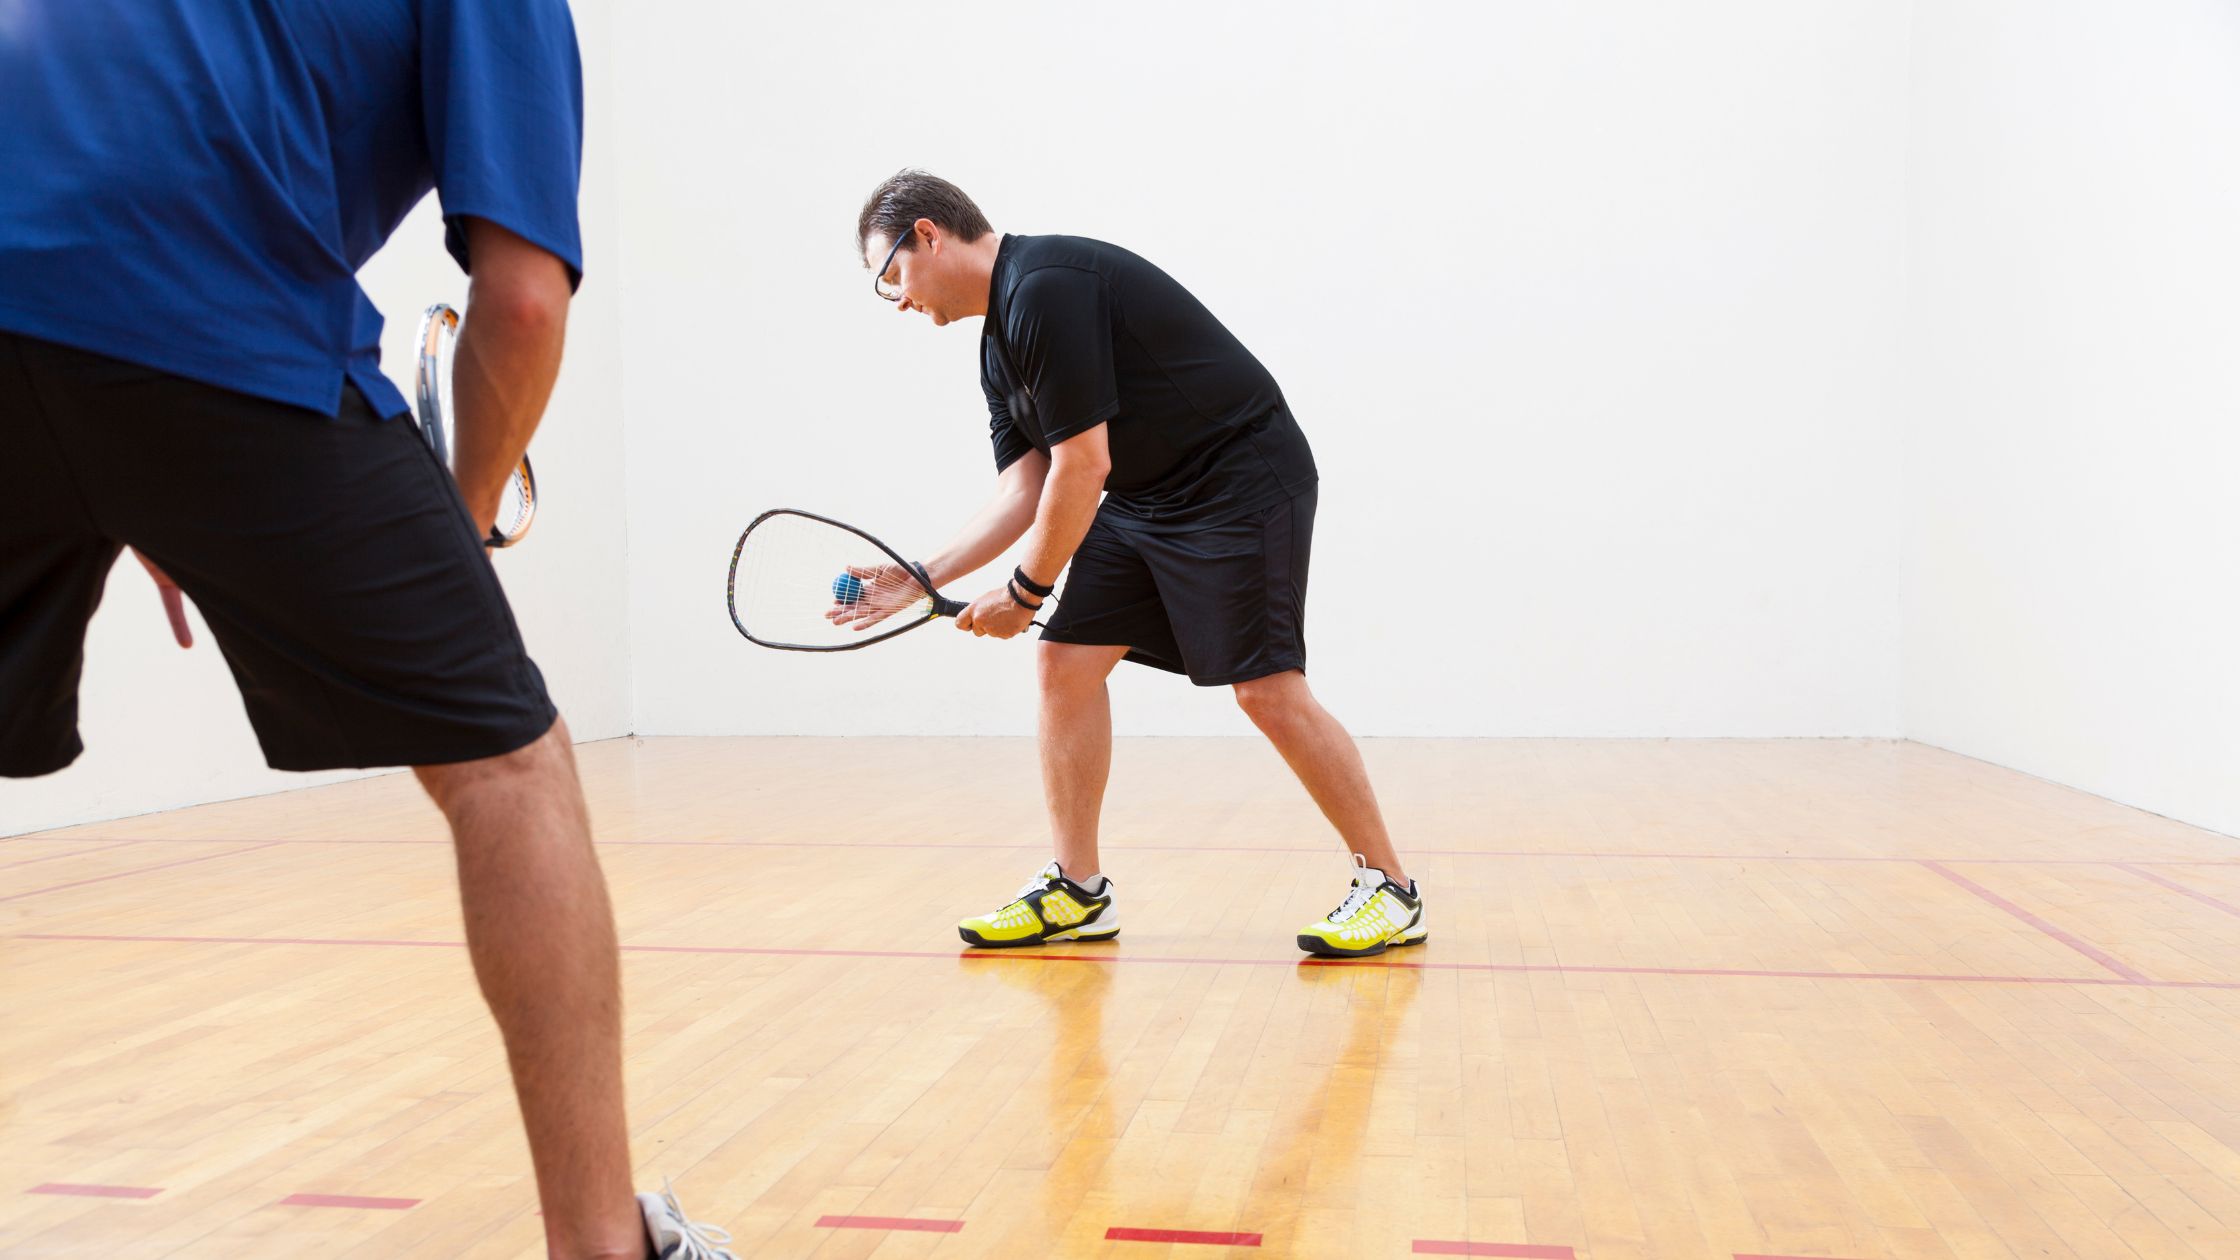 Racquetball has attributes that are consistent with what causes overuse injuries.